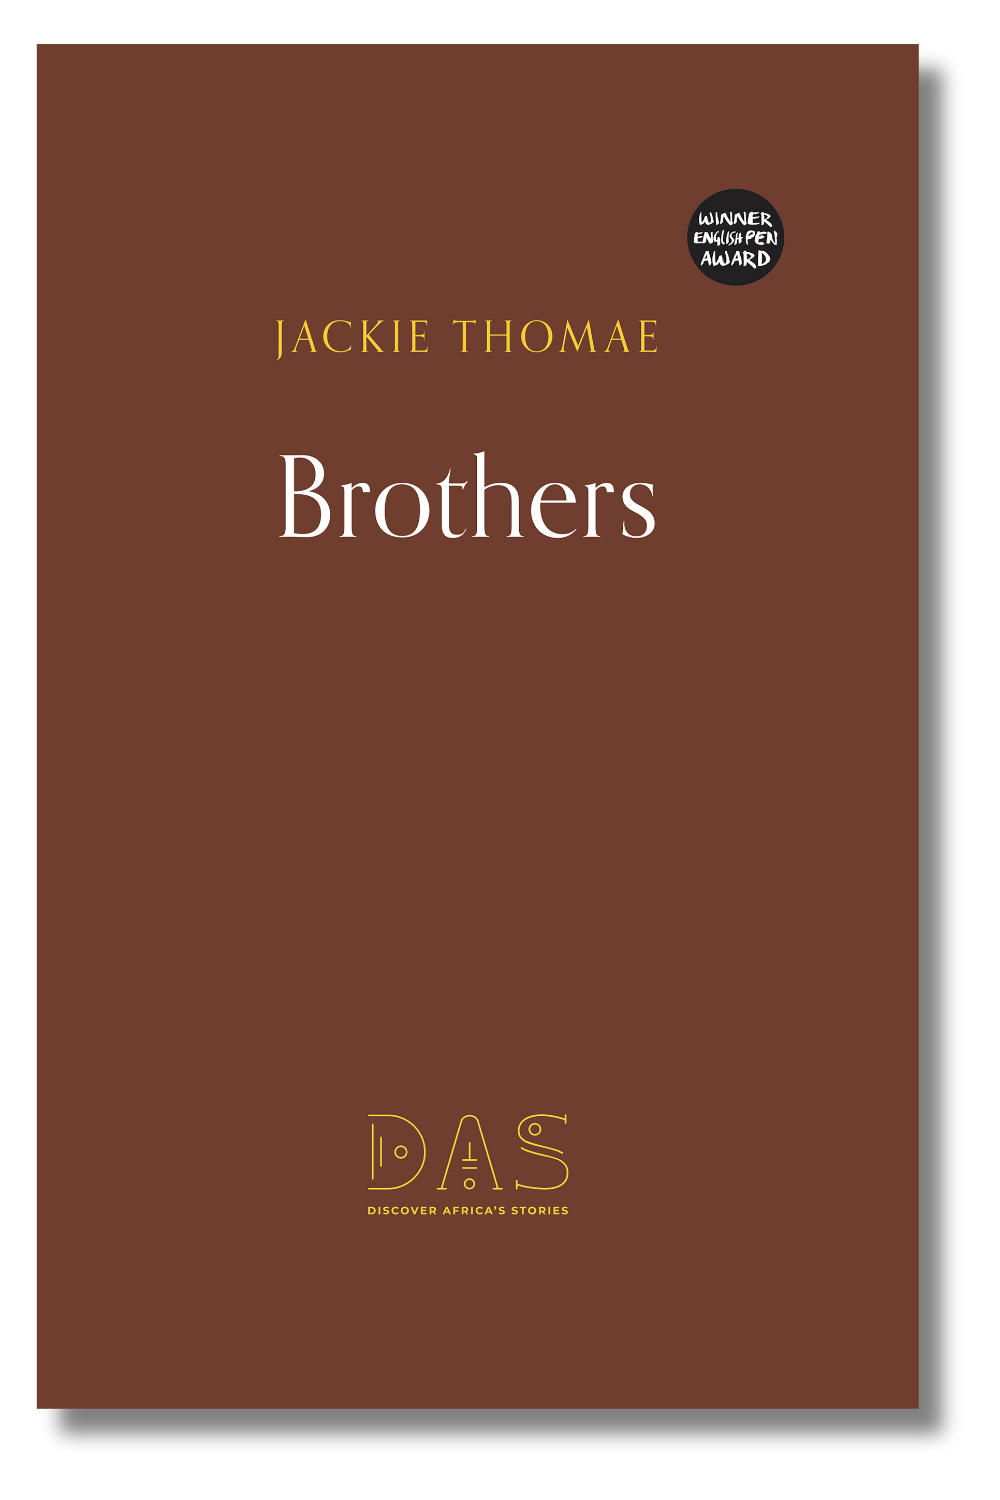 The cover of "Brothers" by Jackie Thomae, tr. by Ruth Ahmedzai Kemp